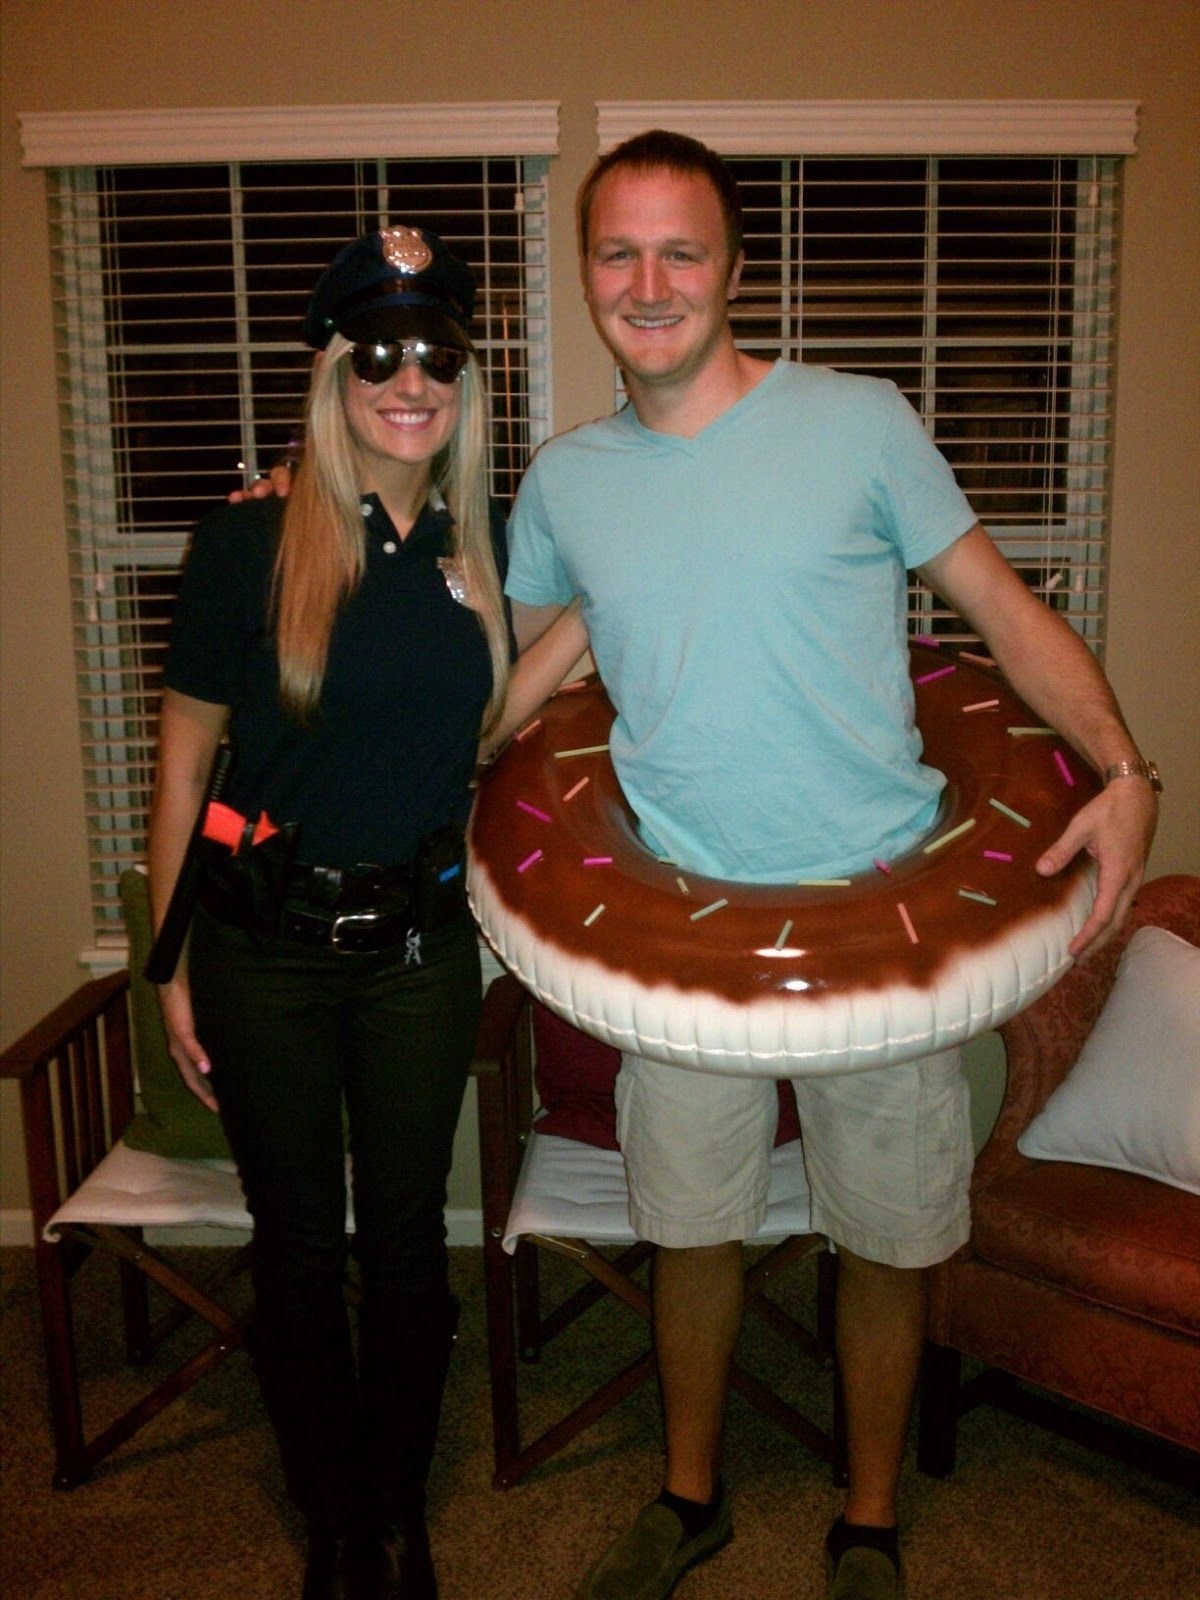 10 Unique Diy Couples Halloween Costume Ideas cop and donut tired of the sexy policewoman costume bring a whole 13 2022